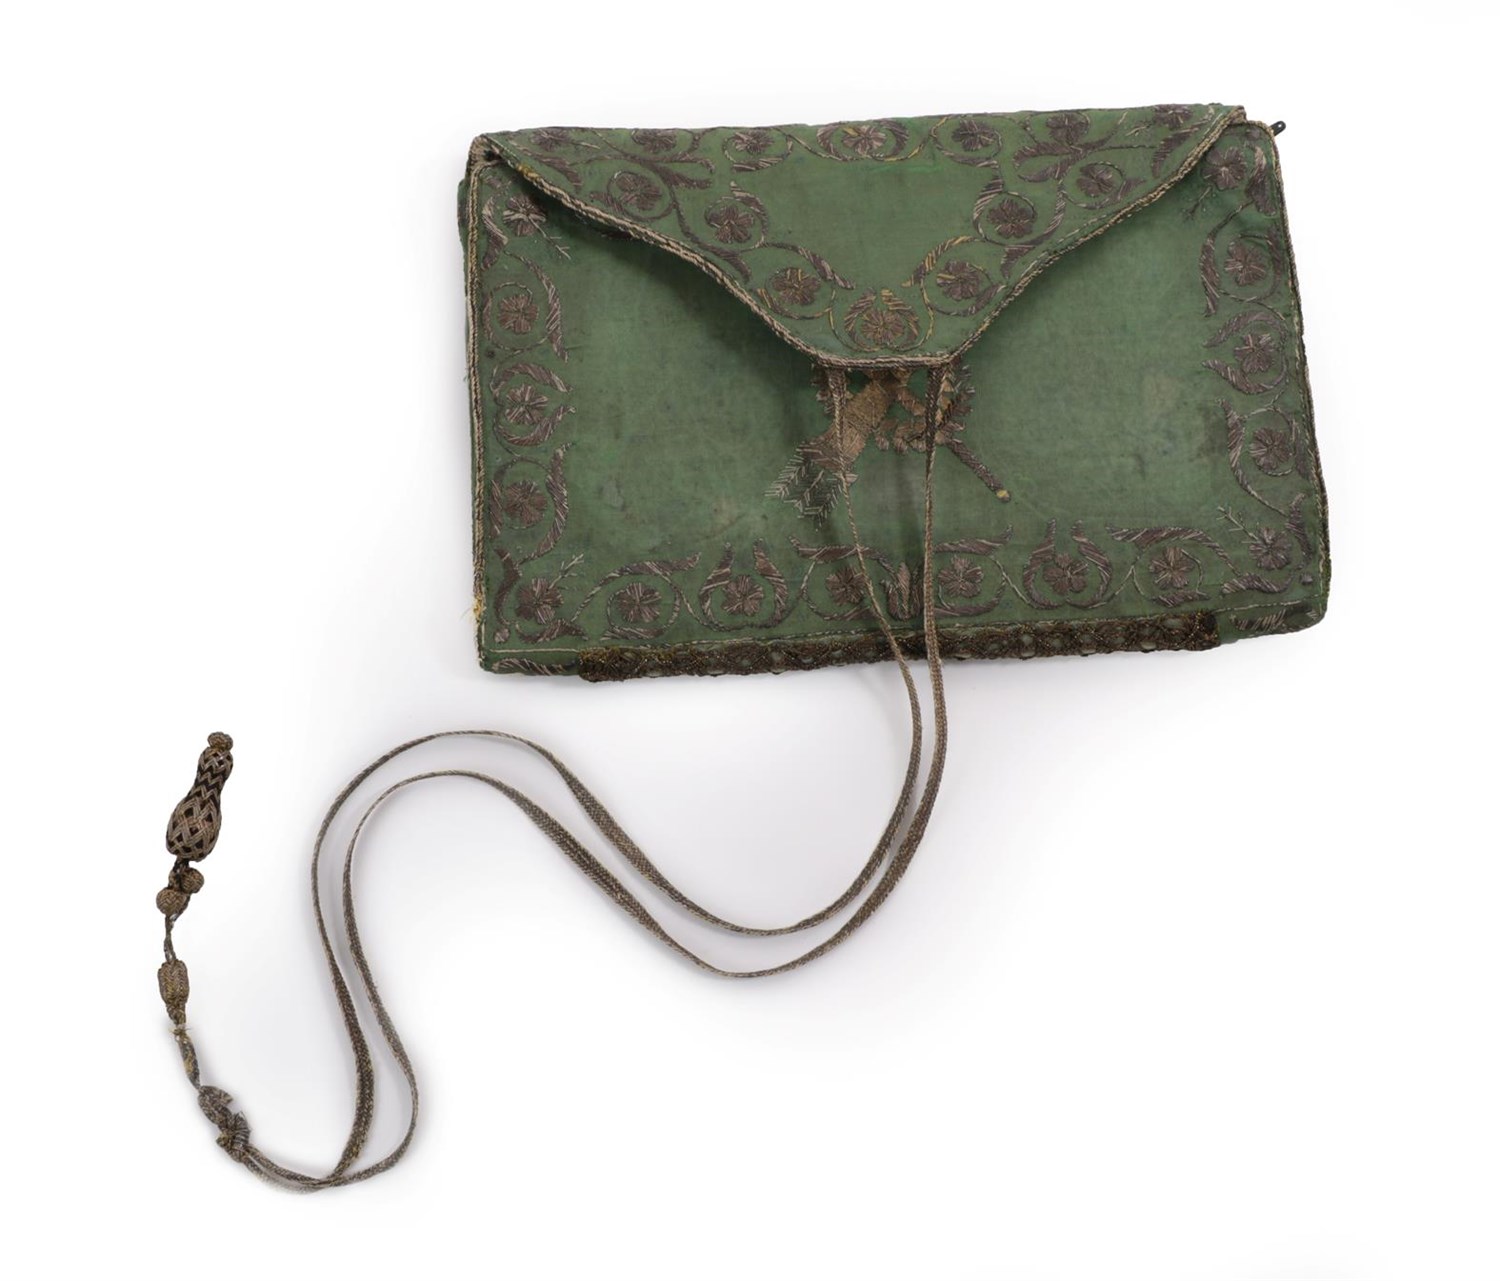 Lot 6068 - 18th Century Green Silk Wallet embroidered in silvered threads around the edges, monogrammed...